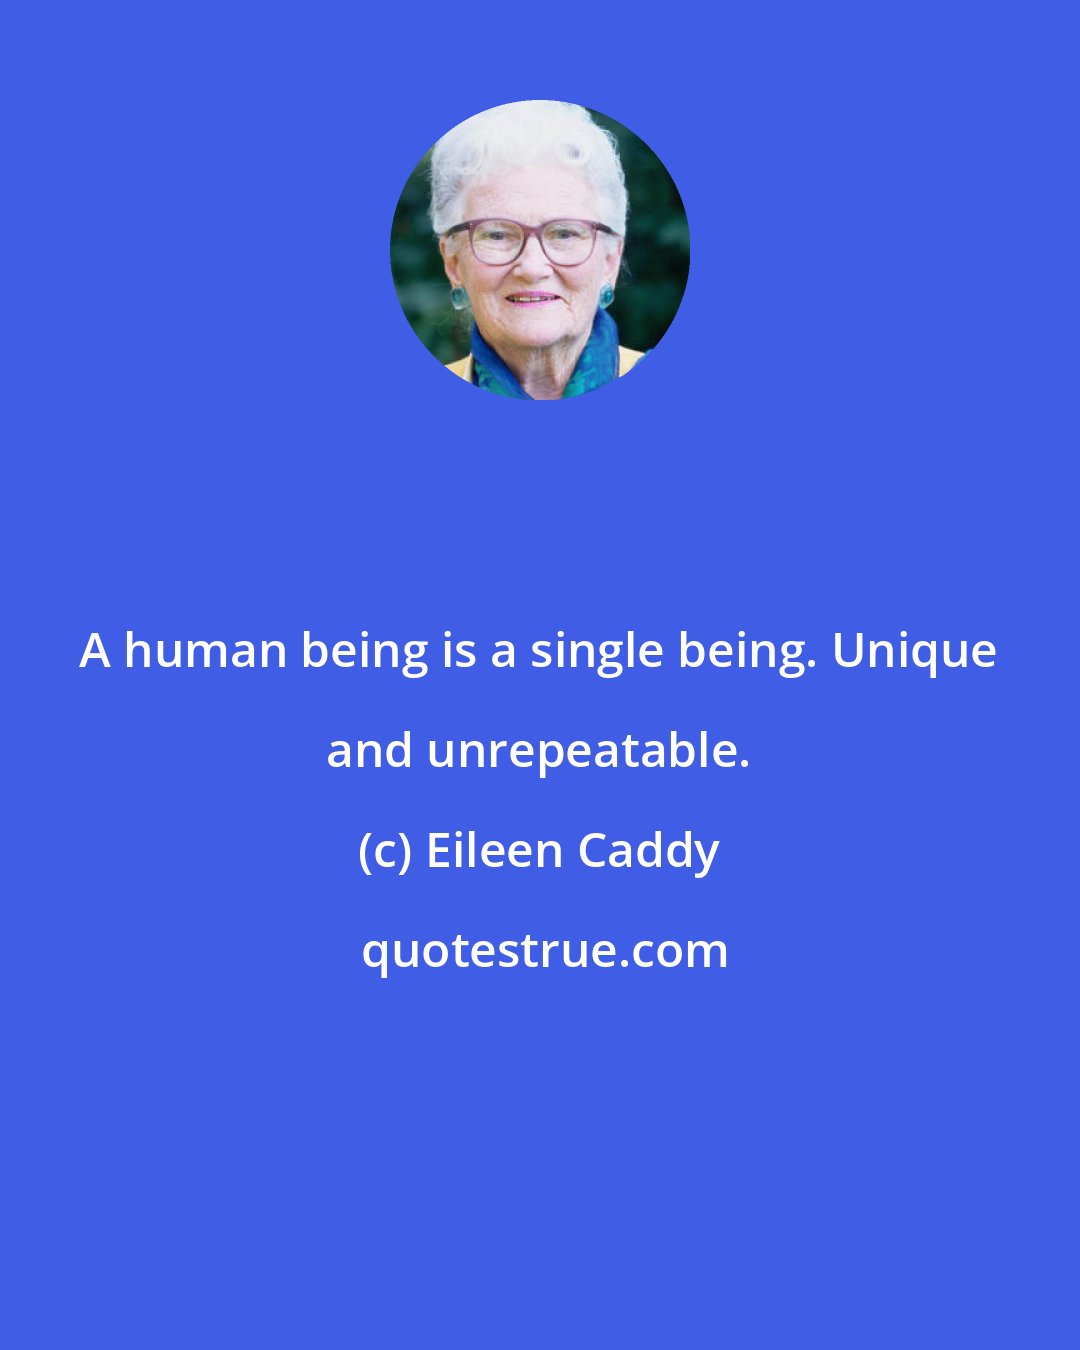 Eileen Caddy: A human being is a single being. Unique and unrepeatable.